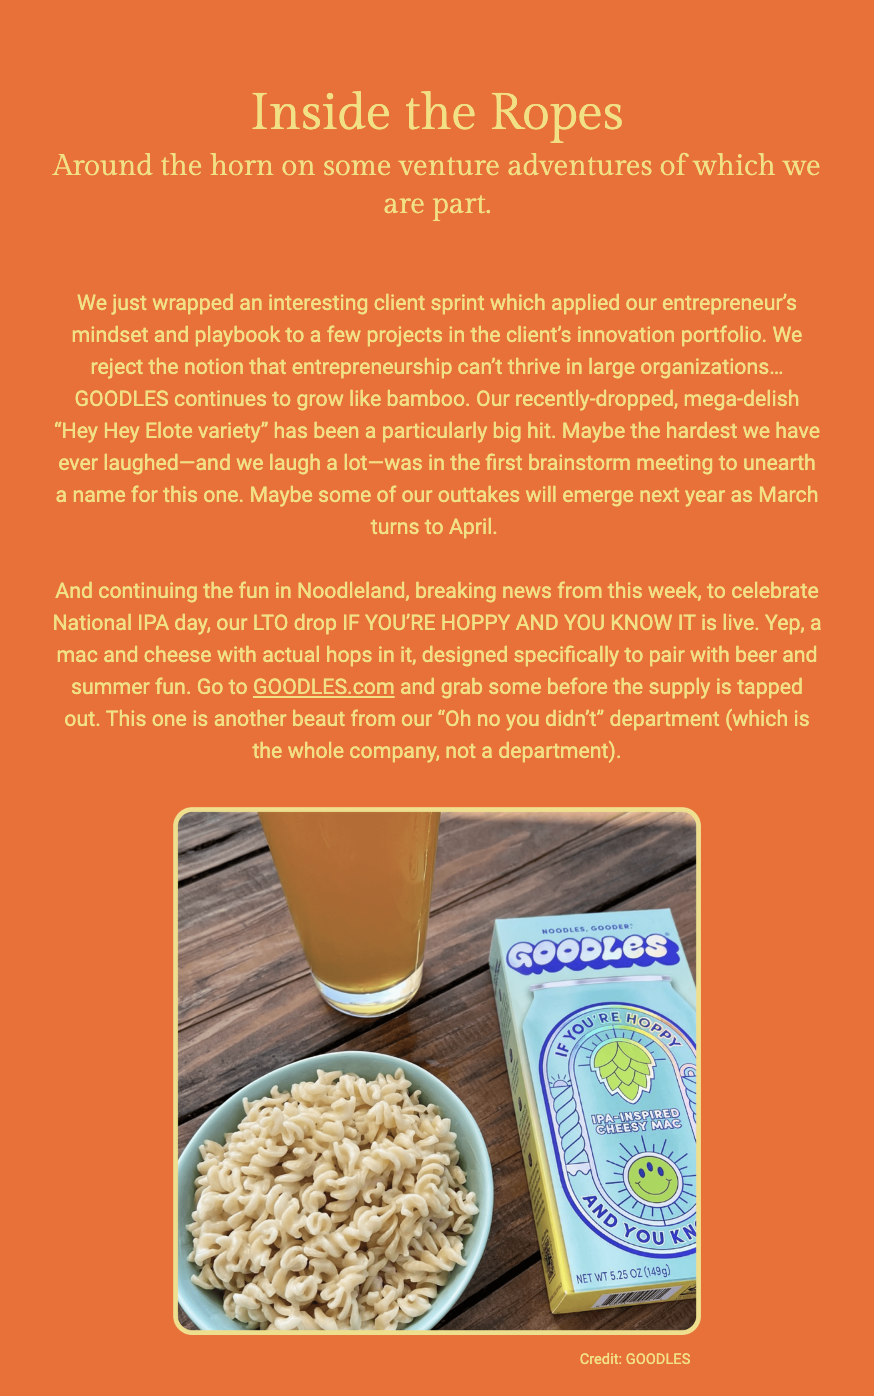 The image contains a heading, a body of text discussing entrepreneurial ventures and product development, and a photo of a food product. Here is the alt text including all of the text that appears in the image:

"The header 'Inside the Ropes' in large, bold font, with a subtitle 'Around the horn on some venture adventures of which we are part.' Below this, text narrates a client project relating to entrepreneurship and innovation, mentioning the growth of GOODLES and introducing a new product, a limited-time offering (LTO) of mac and cheese with hops, in celebration of National IPA day. The product is named 'IF YOU'RE HOPPY AND YOU KNOW IT' and is featured in the accompanying photo, which shows a bowl of mac and cheese next to a glass of beer and the GOODLES product box. The packaging has playful branding and a drawing of a hop cone. The bottom right corner cites 'Credit: GOODLES'."